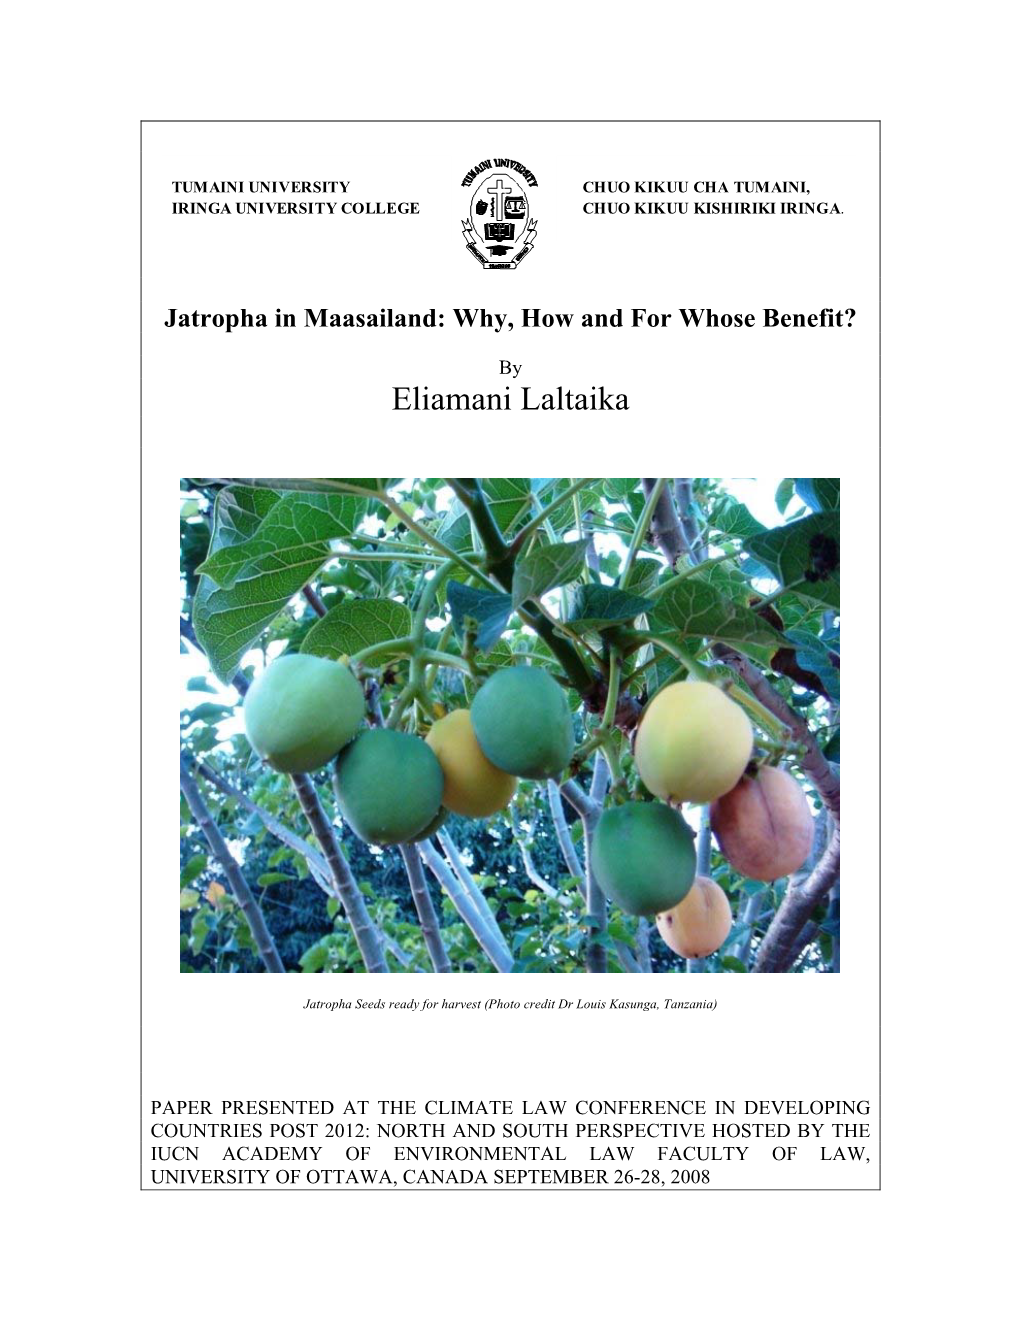 Jatropha in Maasailand: Why, How and for Whose Benefit?